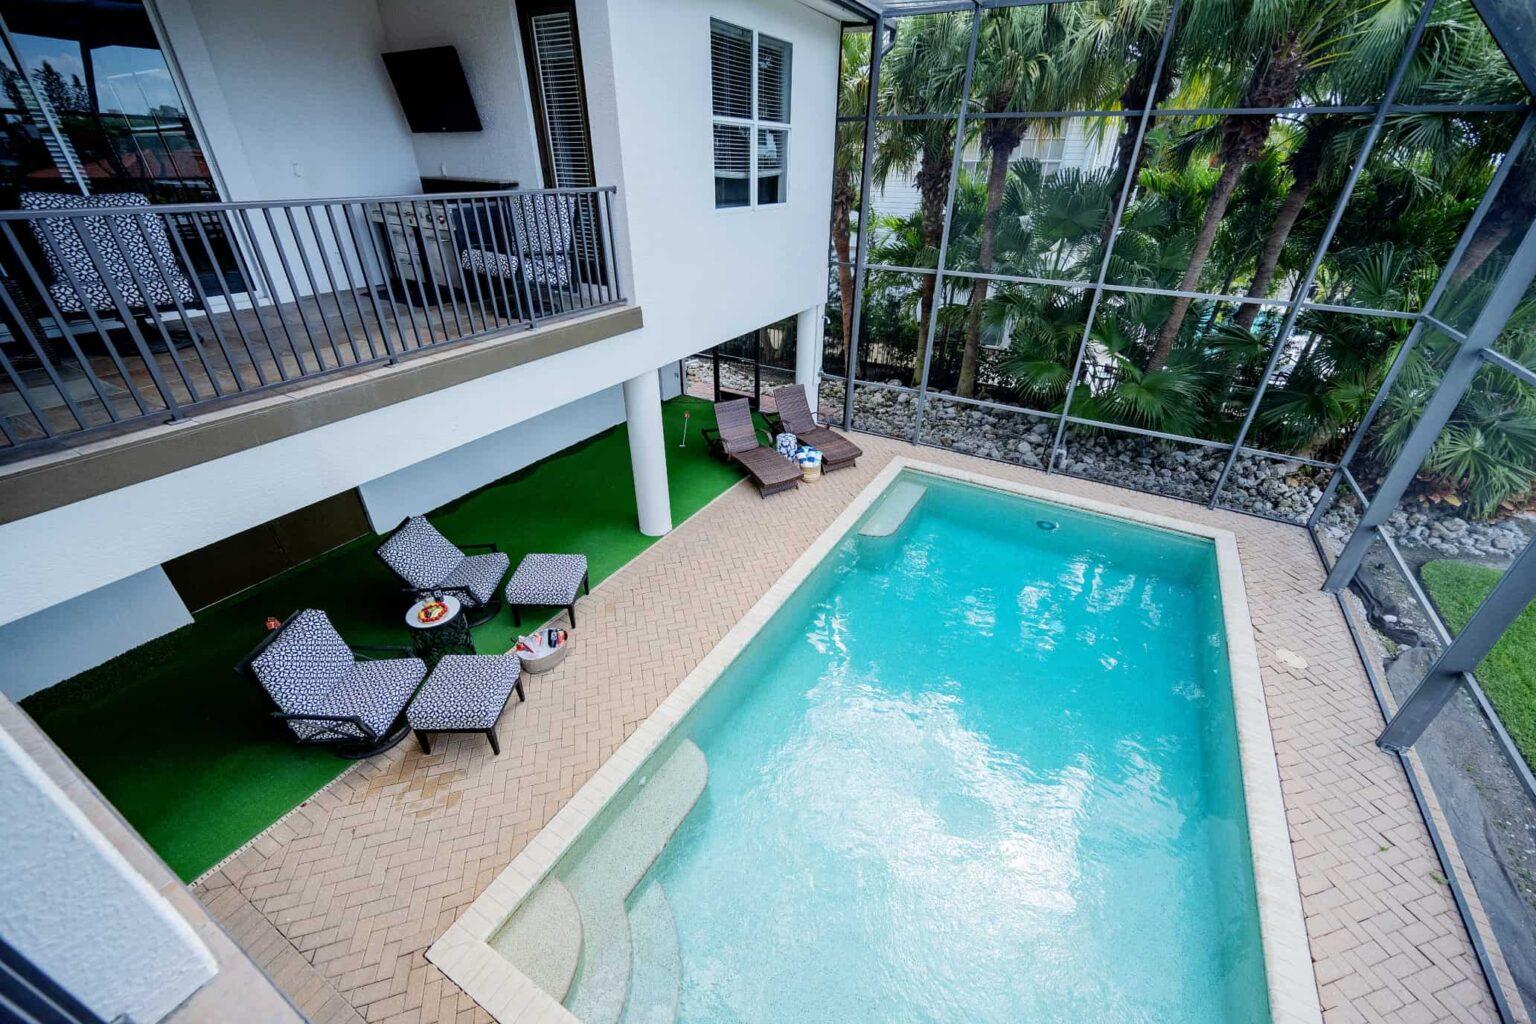 naples fl vacation home Pool from above.